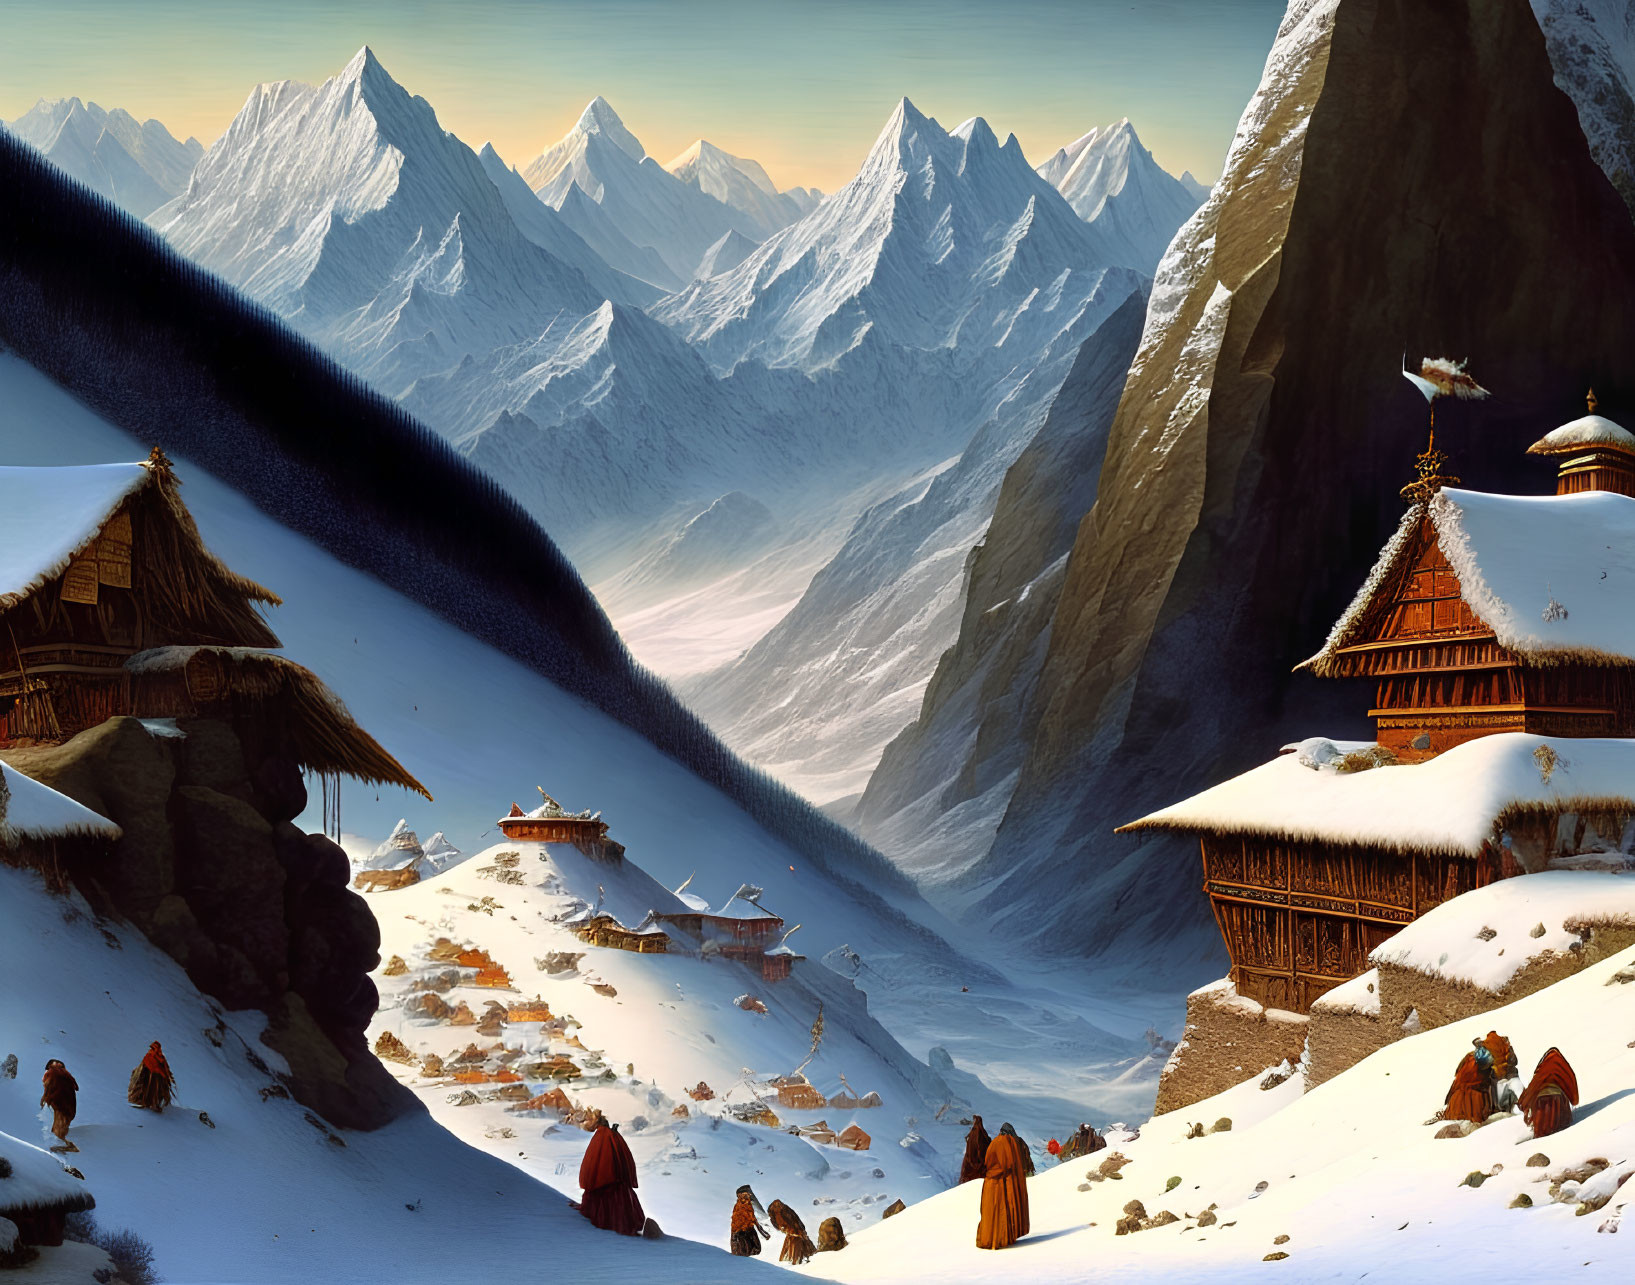 Snow-covered mountain village with wooden huts and colorful attire in frosty setting